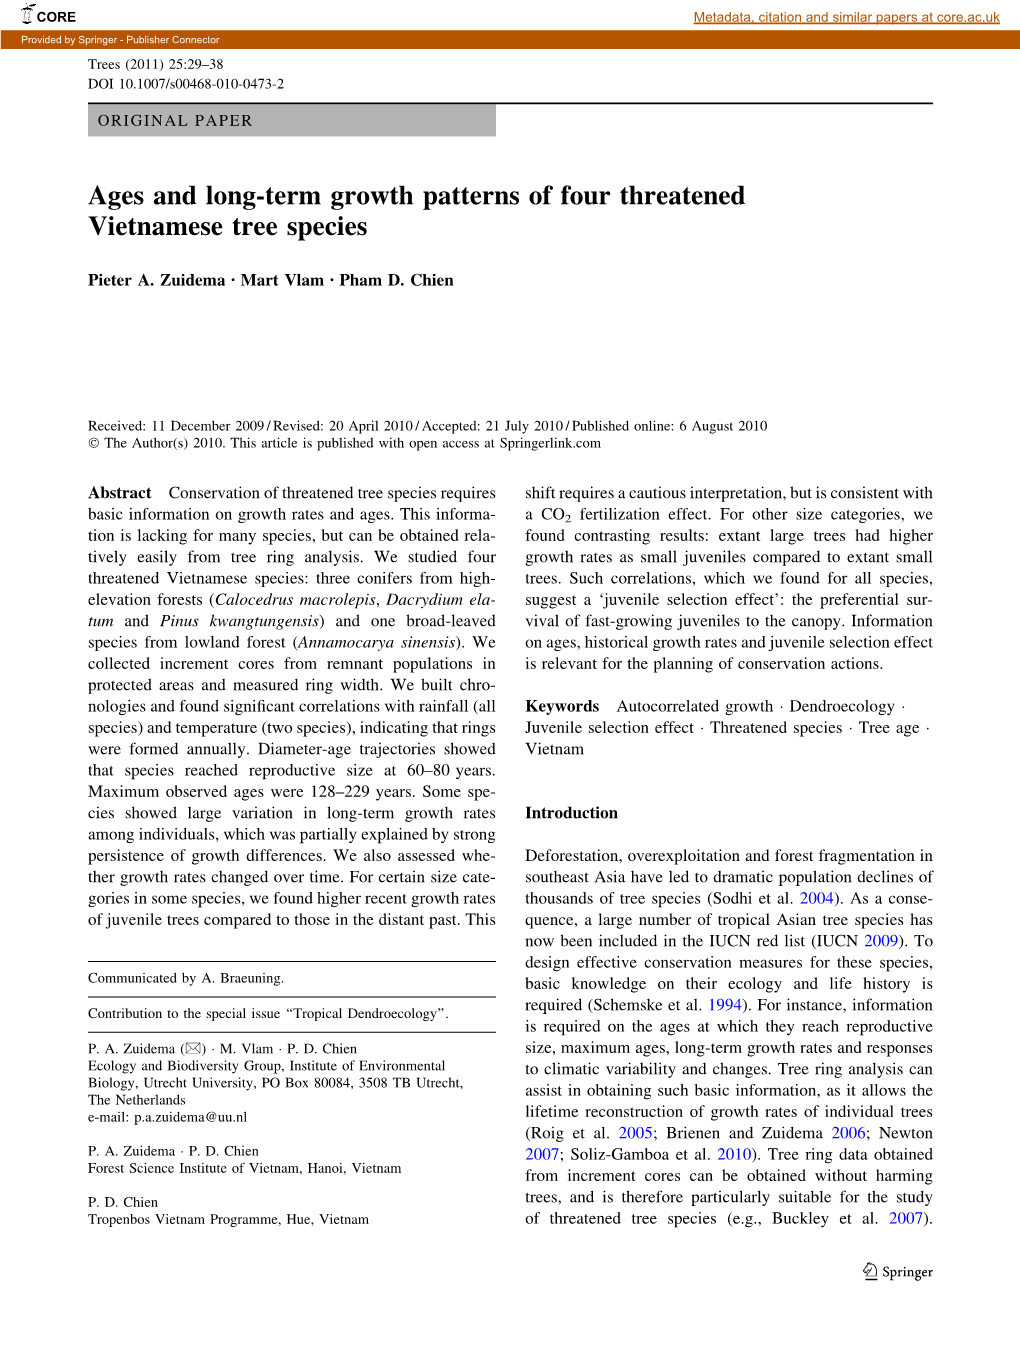 Ages and Long-Term Growth Patterns of Four Threatened Vietnamese Tree Species